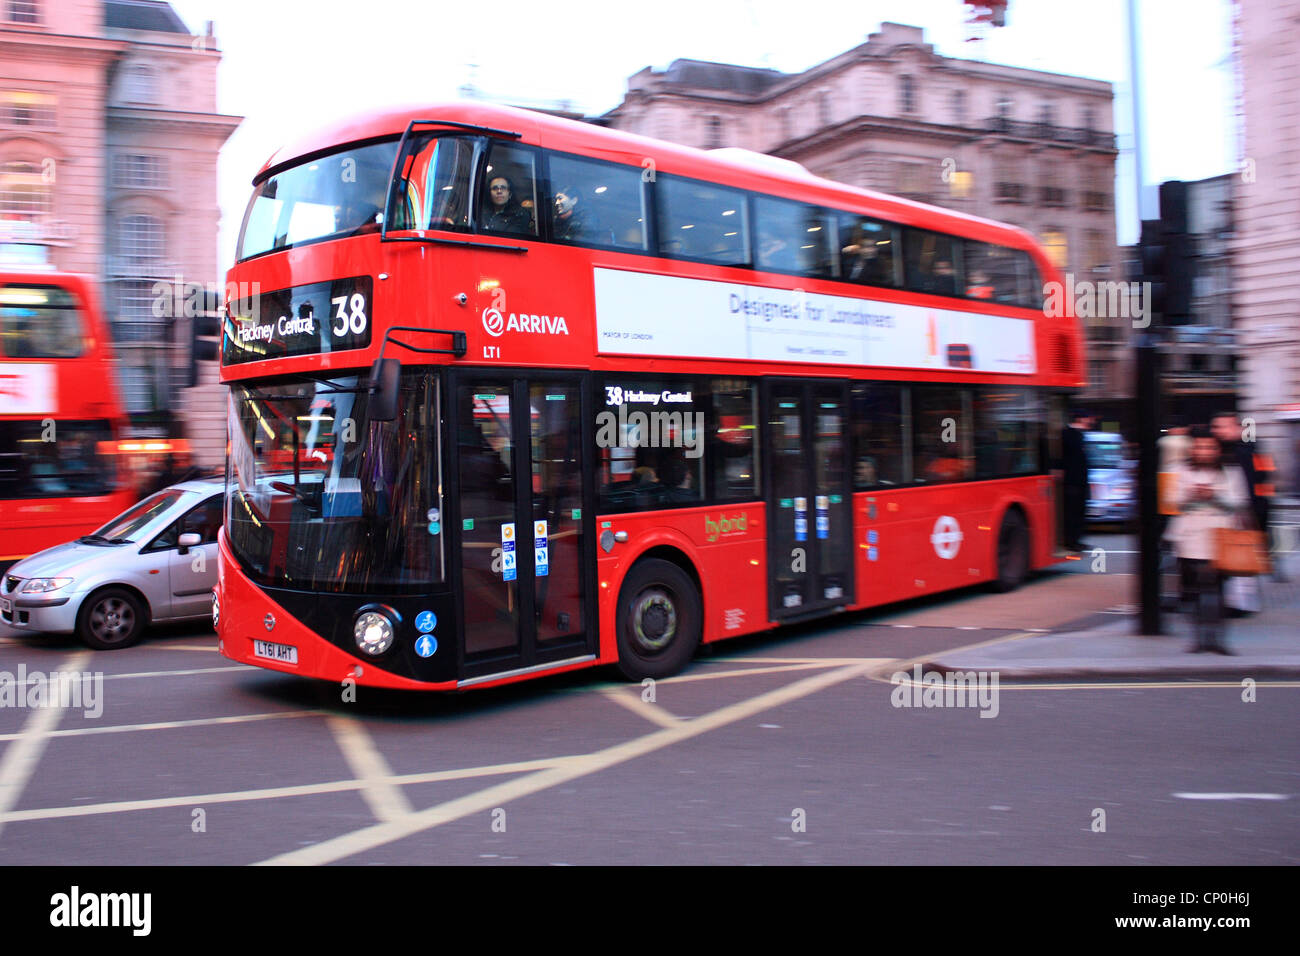 New bus for London in Piccadilly Circus Stock Photo